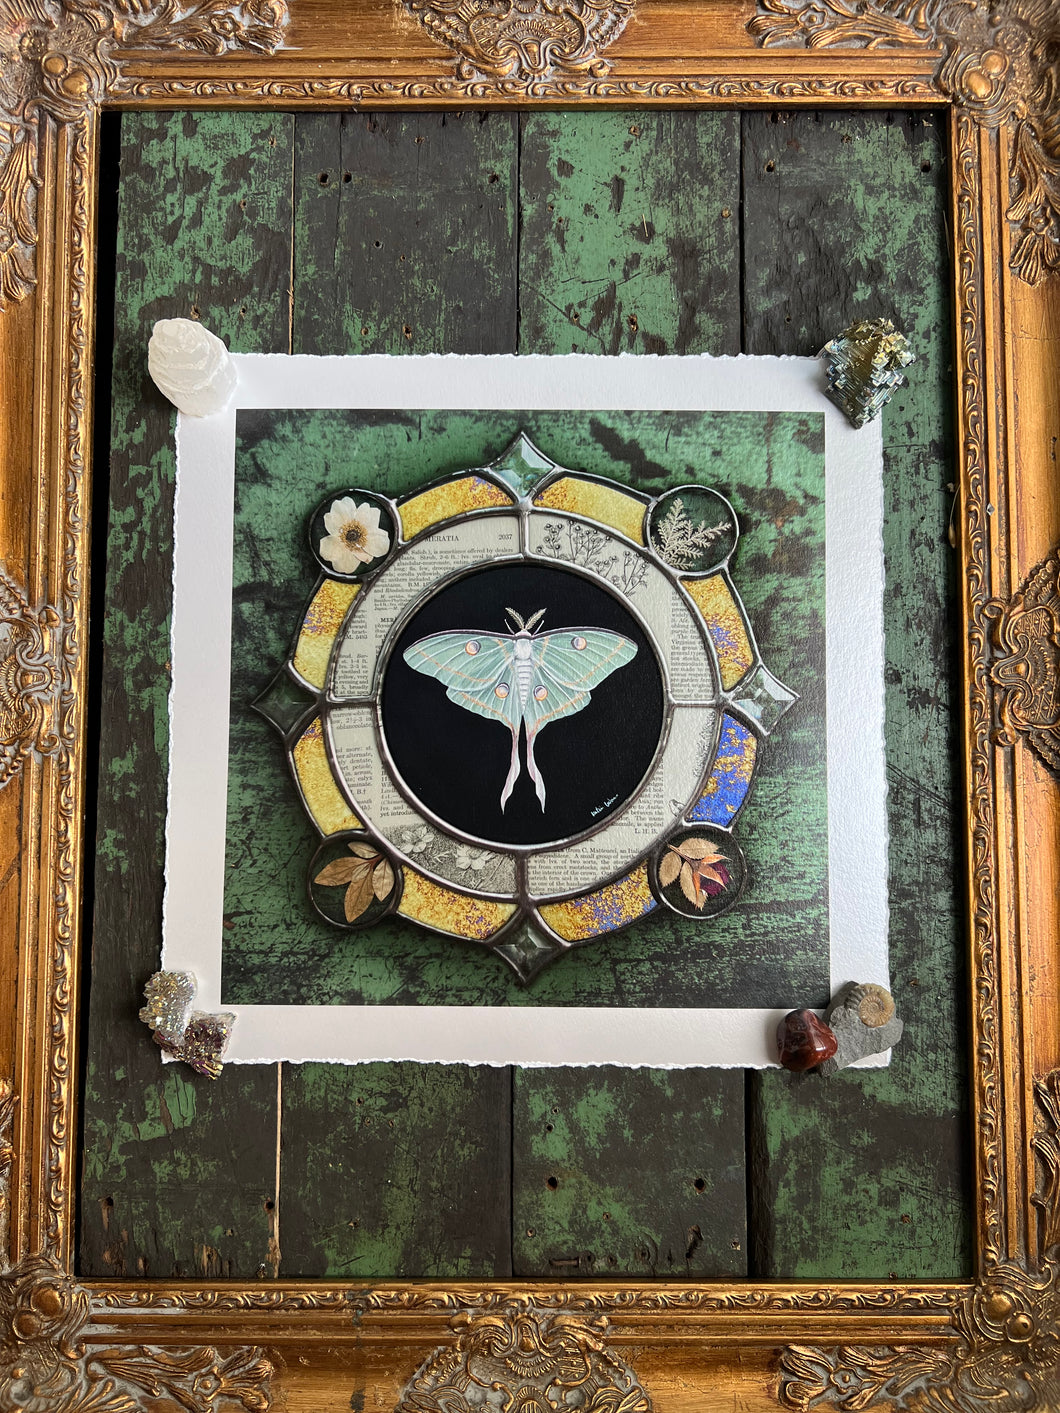 Luna moth medallion print. Luna moth is in central circle on black background with segmented border of vintage book pages. Third and outermost rung is gold mirror with bronze flecks, pressed wildflowers, and glass bevels in alternating border. 12x12